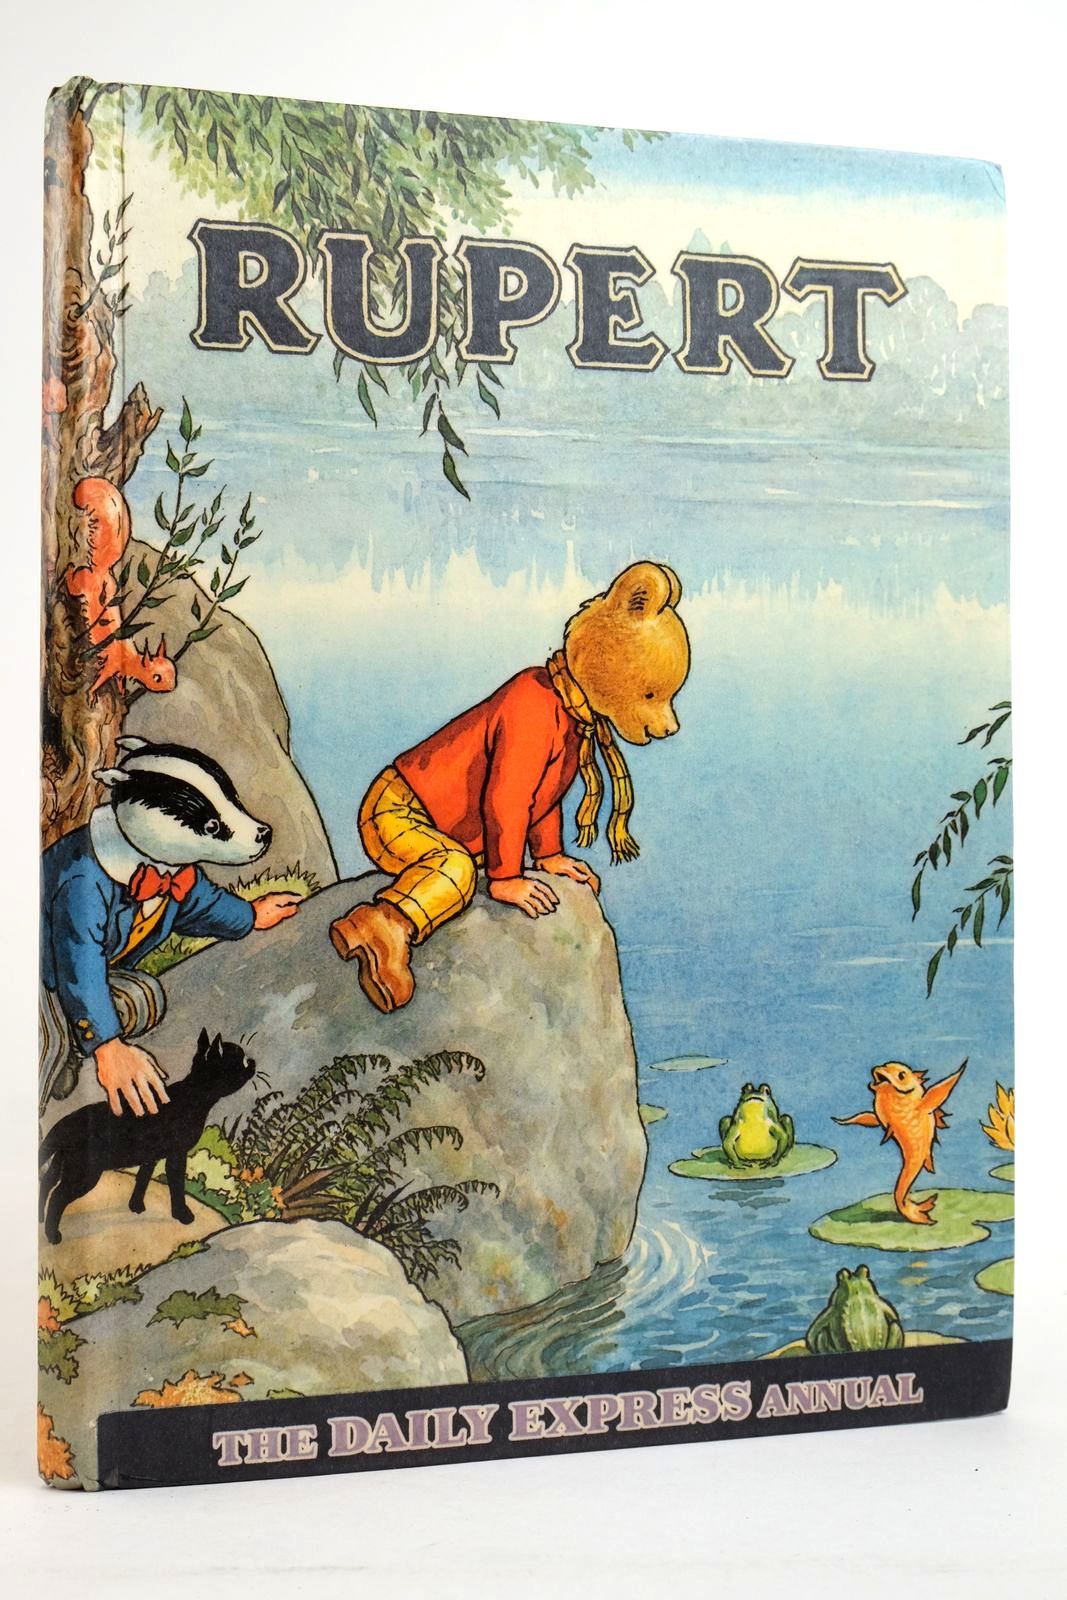 Photo of RUPERT ANNUAL 1969 written by Bestall, Alfred illustrated by Bestall, Alfred published by Daily Express (STOCK CODE: 2135820)  for sale by Stella & Rose's Books